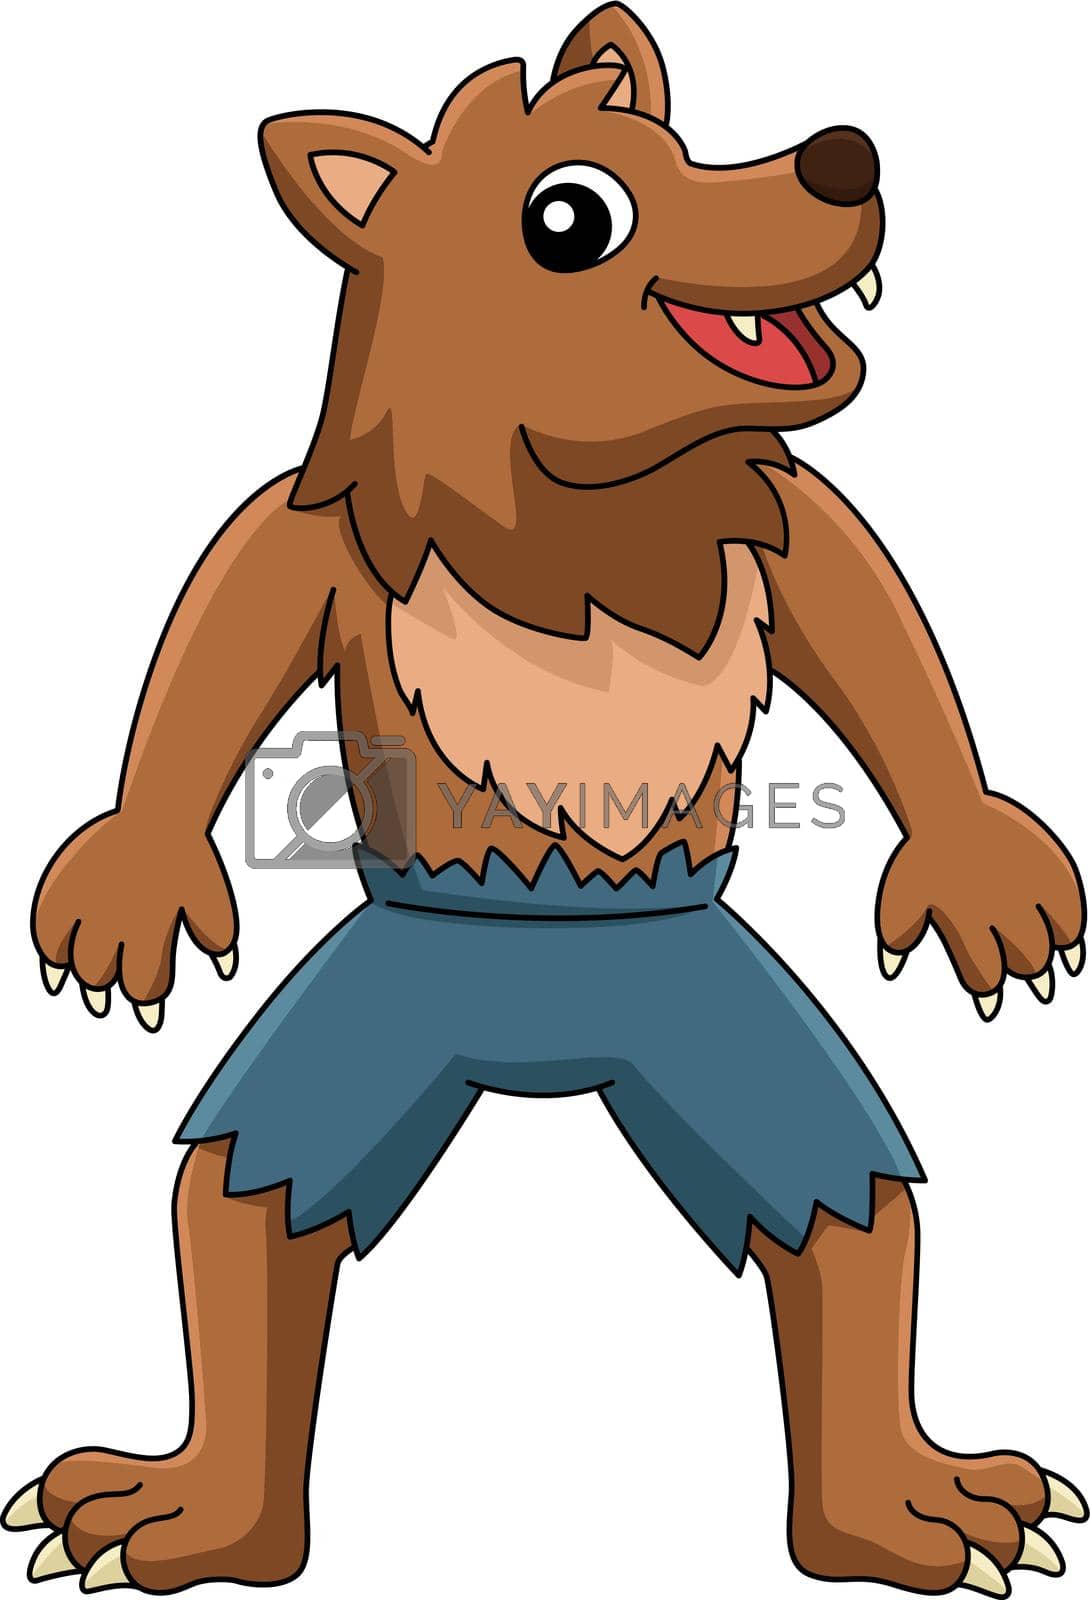 Royalty free image of Werewolf Halloween Cartoon Colored Clipart by abbydesign